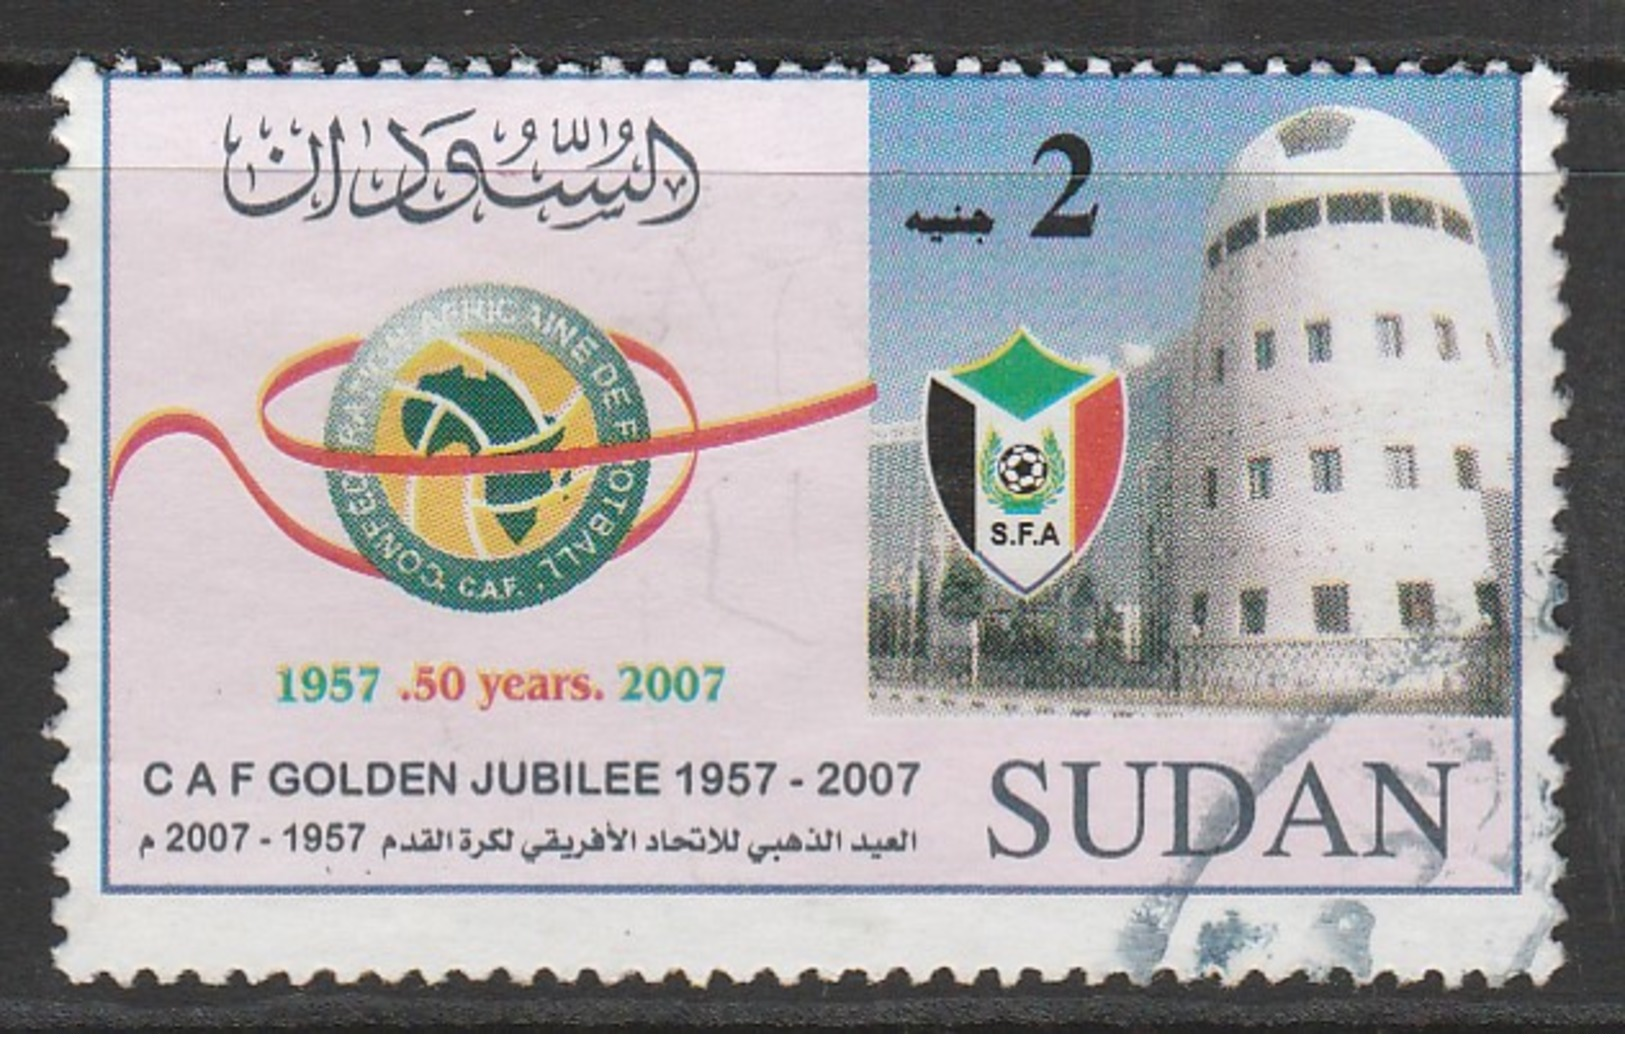 Sudan 2007 The 50th Anniversary Of Confederation Of African Football Or CAF 2 SDG Multicoloured SW 615 O Used - Sudan (1954-...)